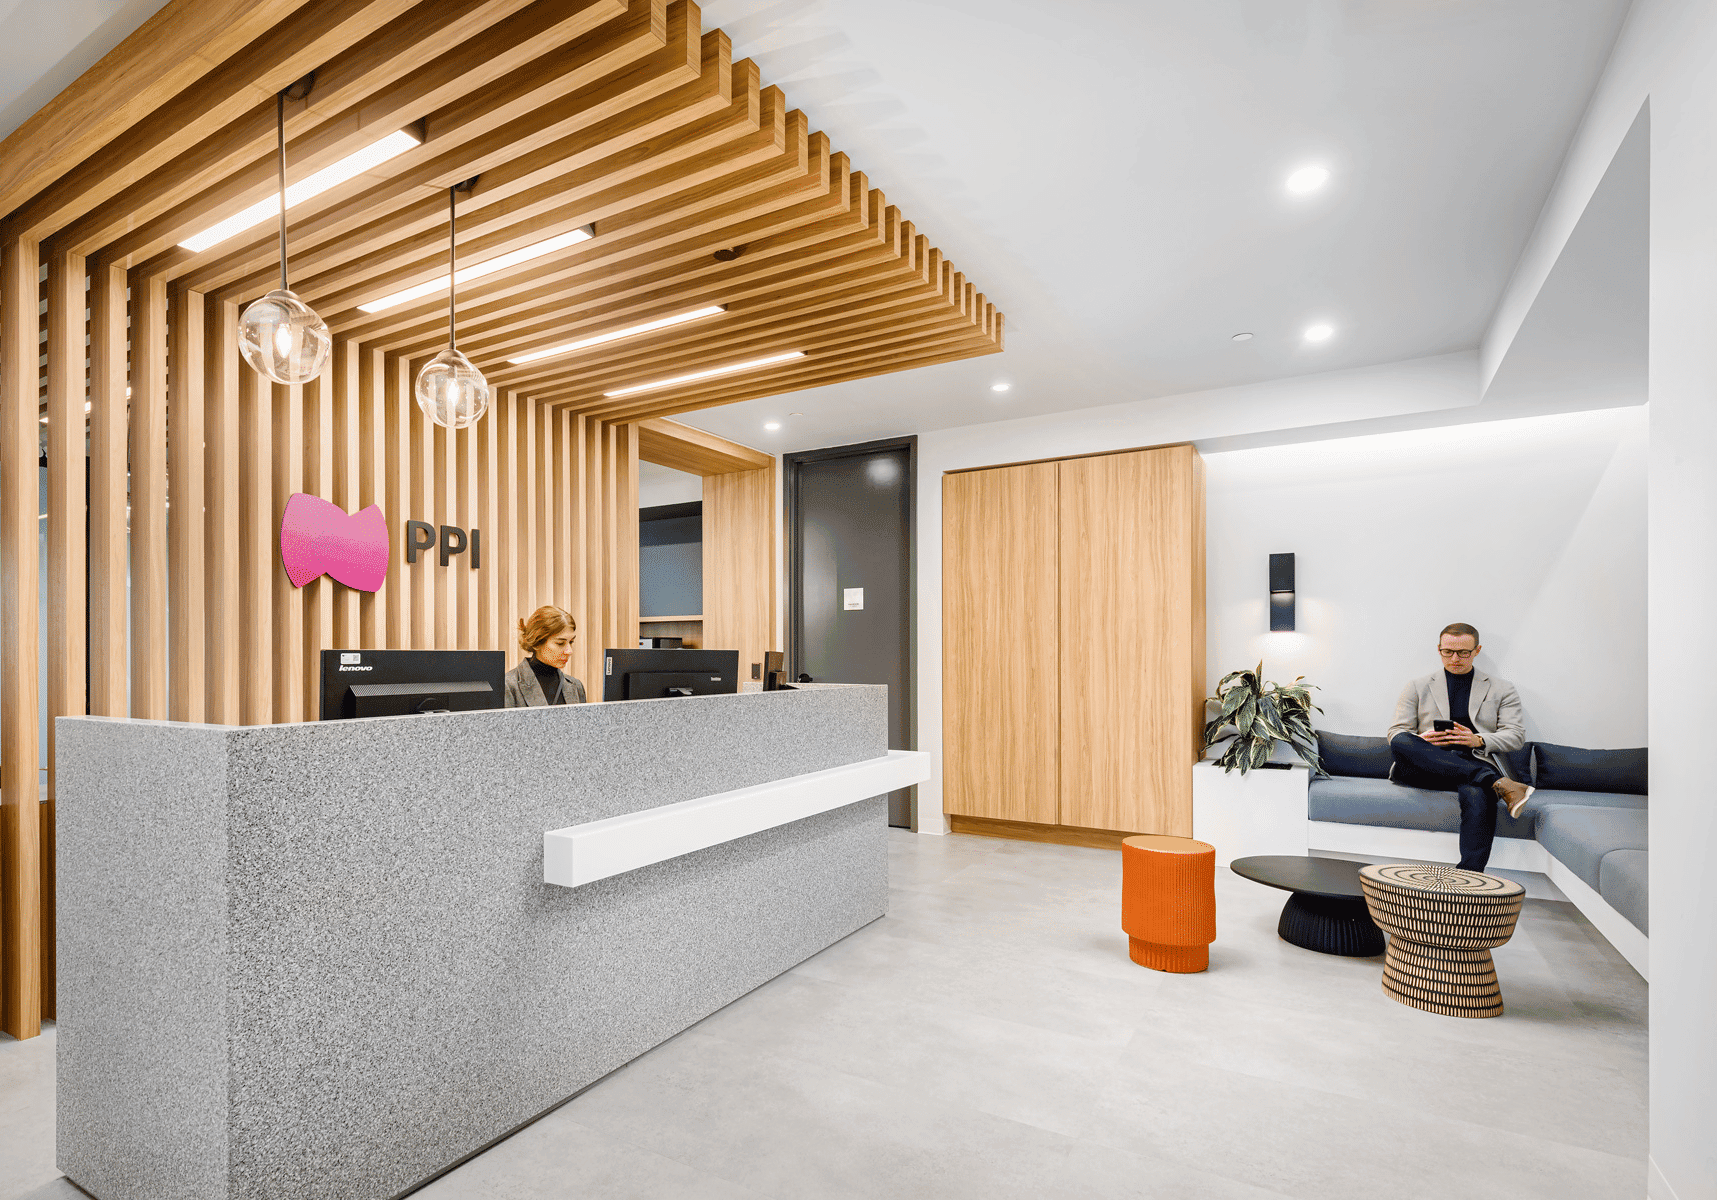 Modern office lobby with a reception desk, two employees, wooden slats on the ceiling, and stylish seating areas.